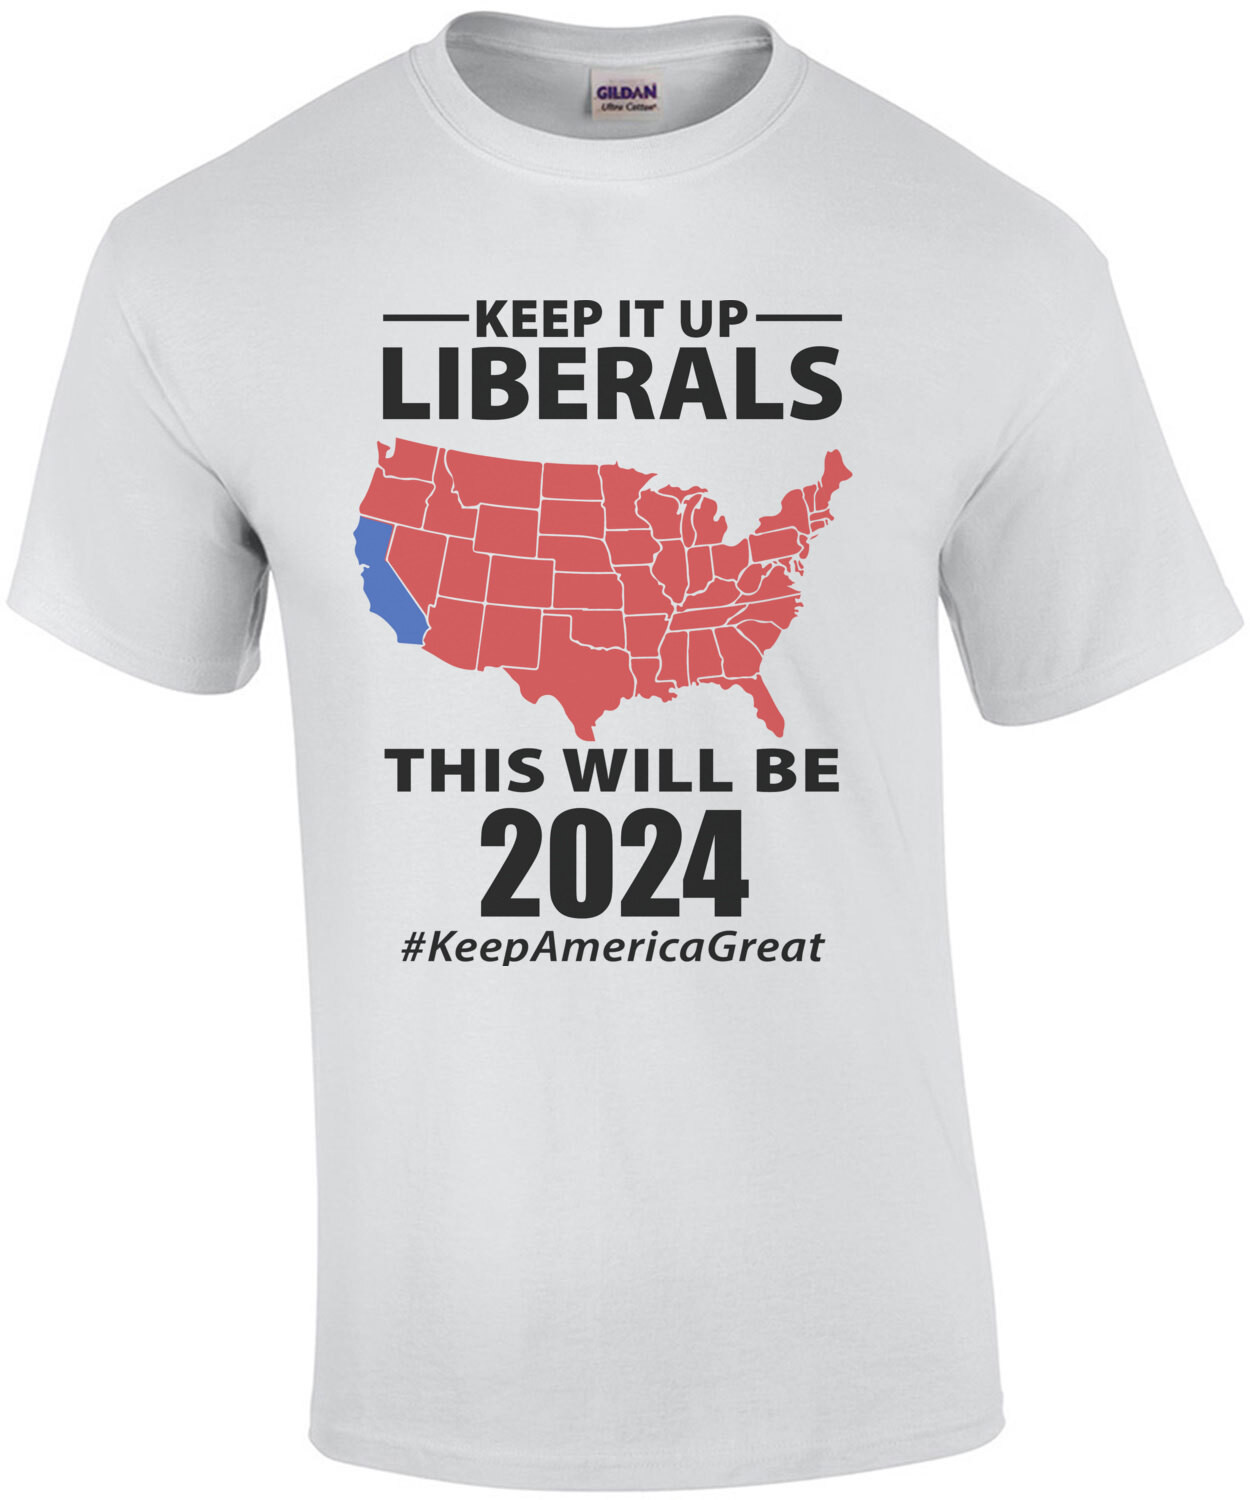 Keep it up liberals - this will be 2024 #KeepAmericaGreat - Pro Trump - Conservative T-Shirt